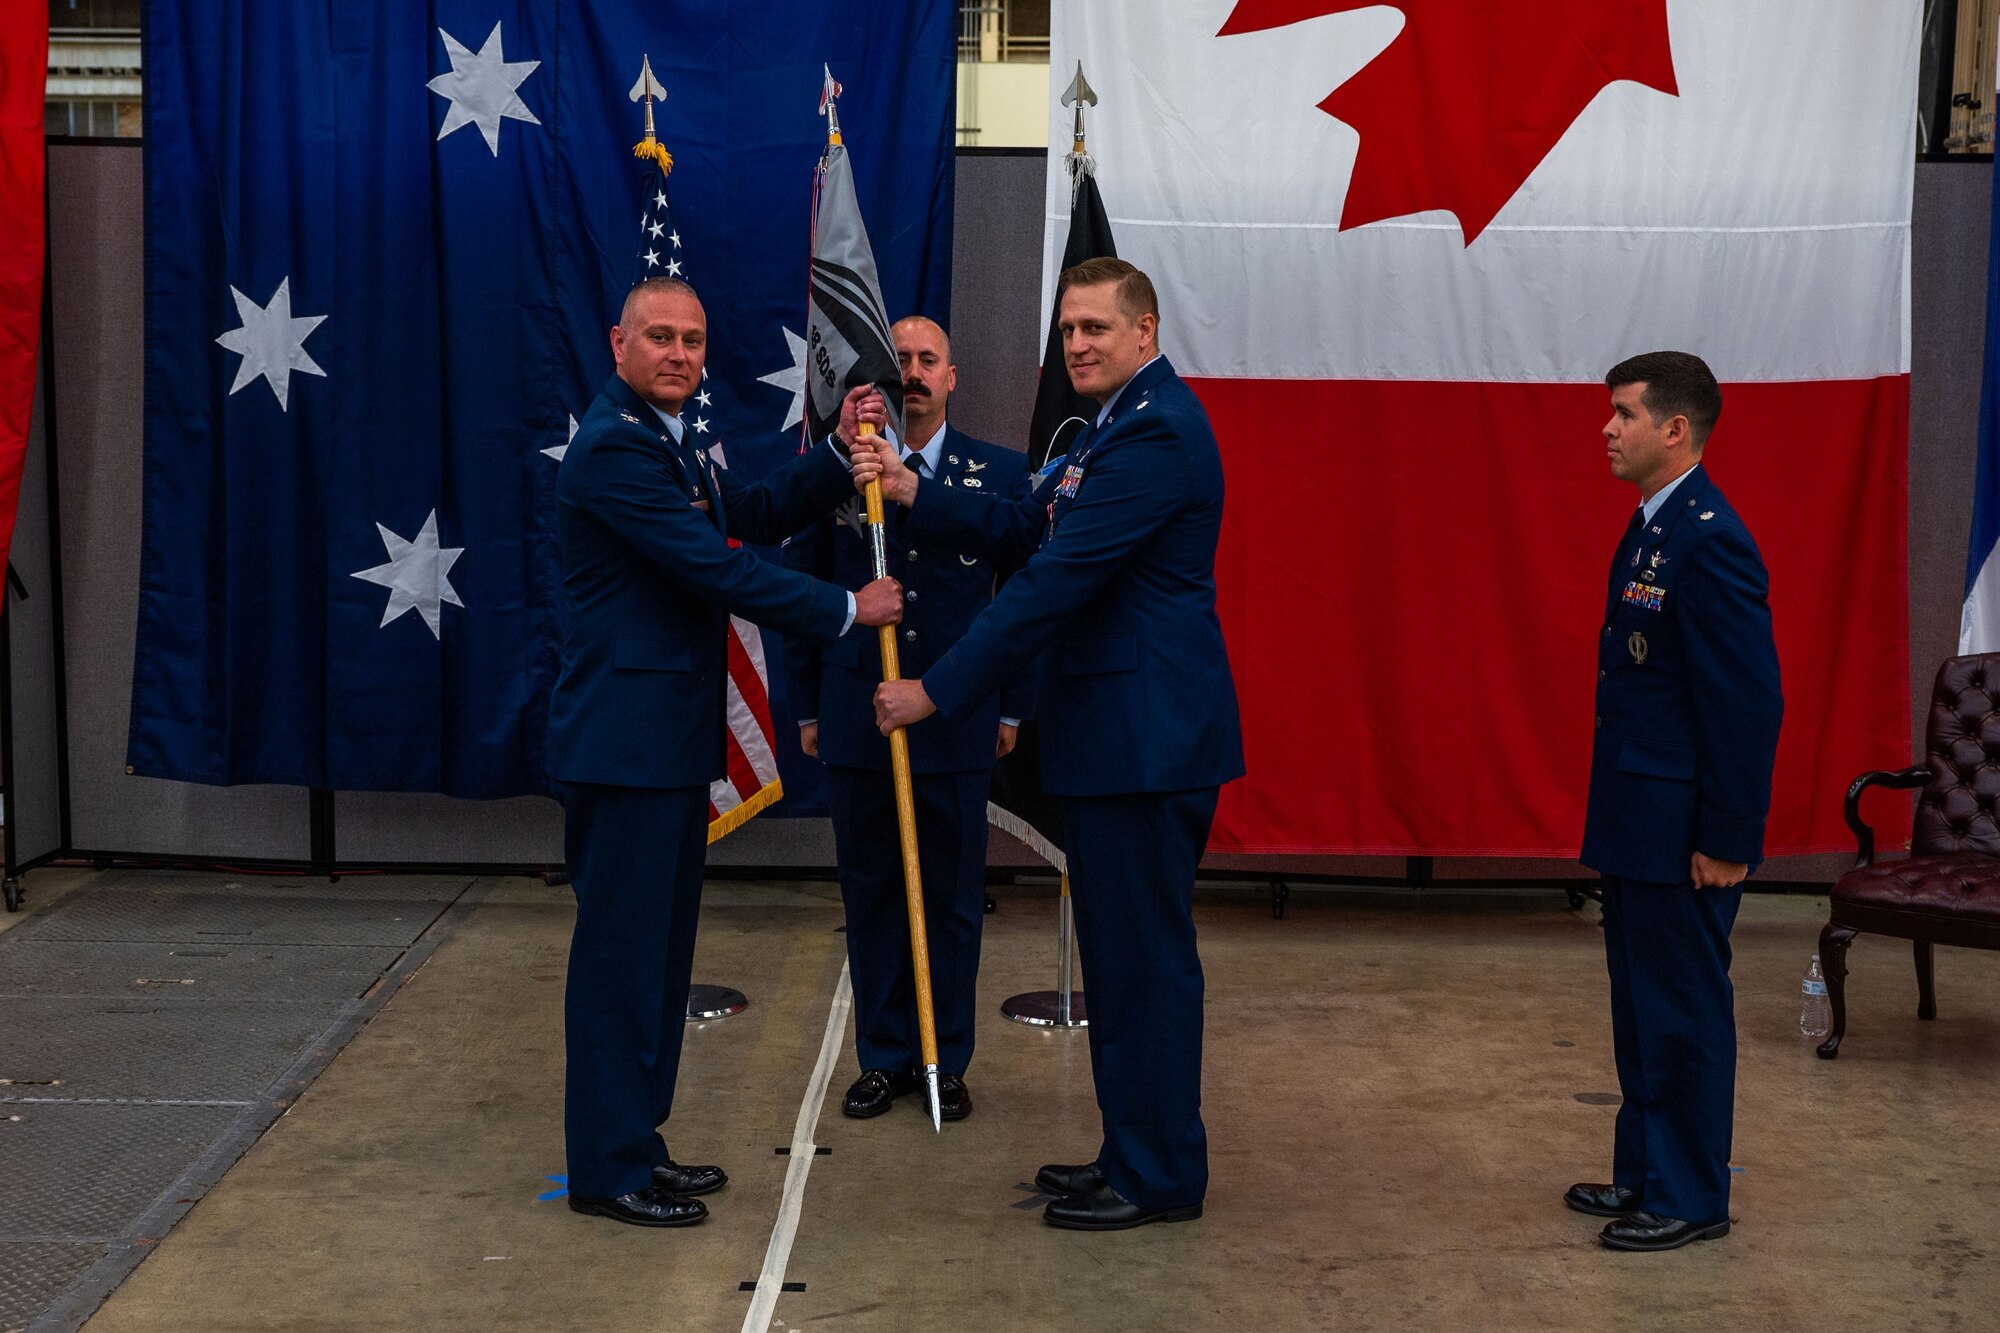 U.S. Space Force Col. Marc A. Brock, Space Delta 2 commander, left, holds the 18th Space Defense Squadron (18 SDS) guidon with outgoing 18 SDS Lt. Col. Matthew J. Lintker during the squadron’s change of command ceremony at Vandenberg Space Force Base, Calif., June 21, 2023. The ceremonial exchanging of the guidon signifies Lintker relinquishing his command of the 18 SDS over to Brock who then transferred the responsibility to U.S. Space Force Lt. Col. Jordan O.E. Mugg, the incoming 18 SDS commander. (U.S. Space Force photo by Tech. Sgt. Luke Kitterman)